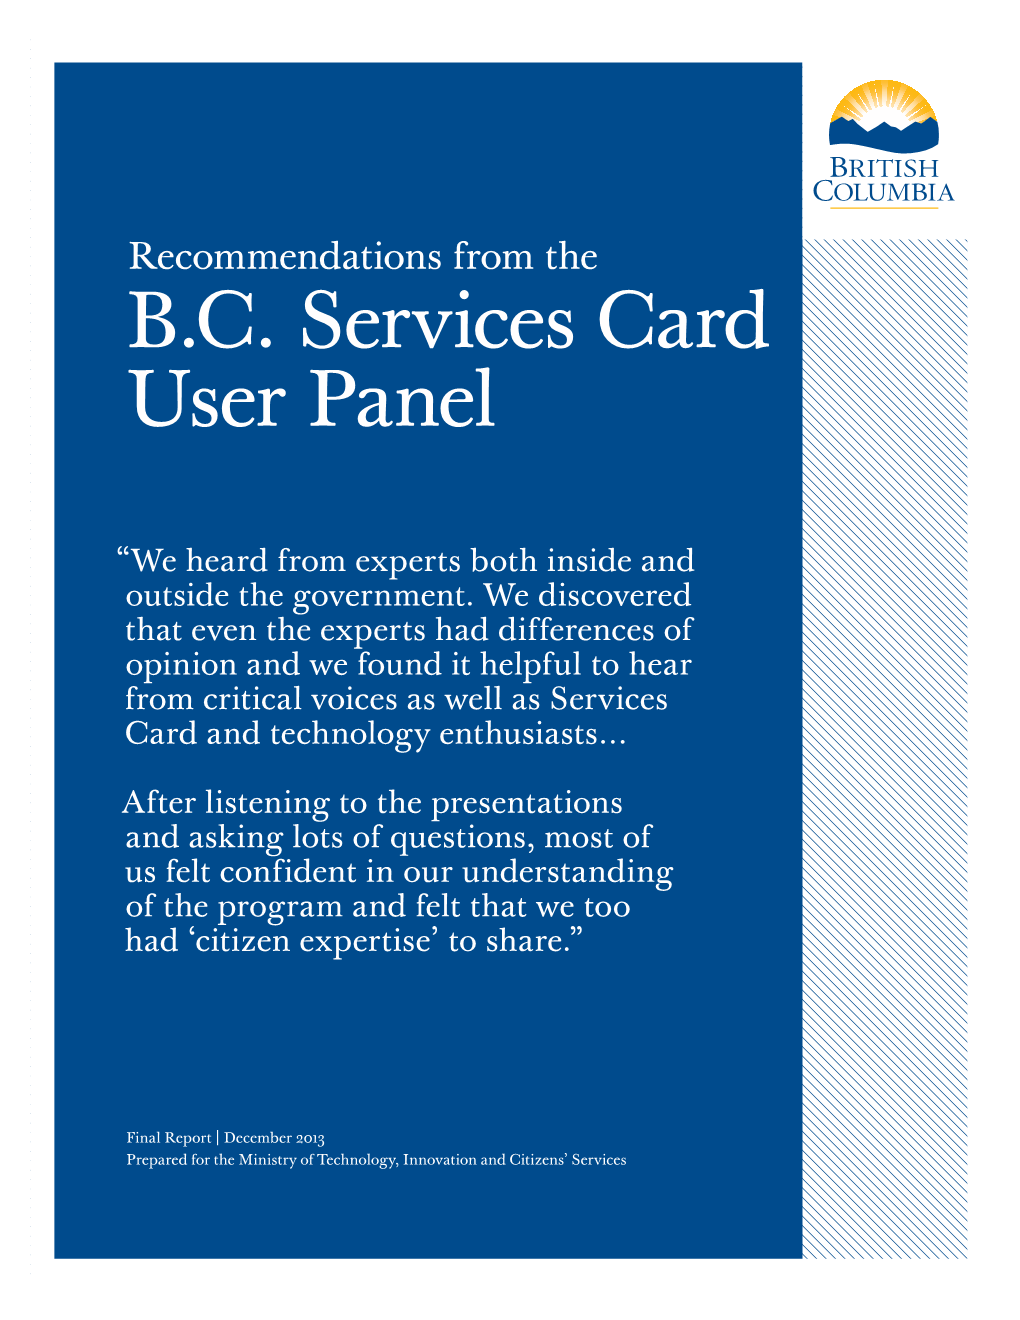 BC Services Card User Panel